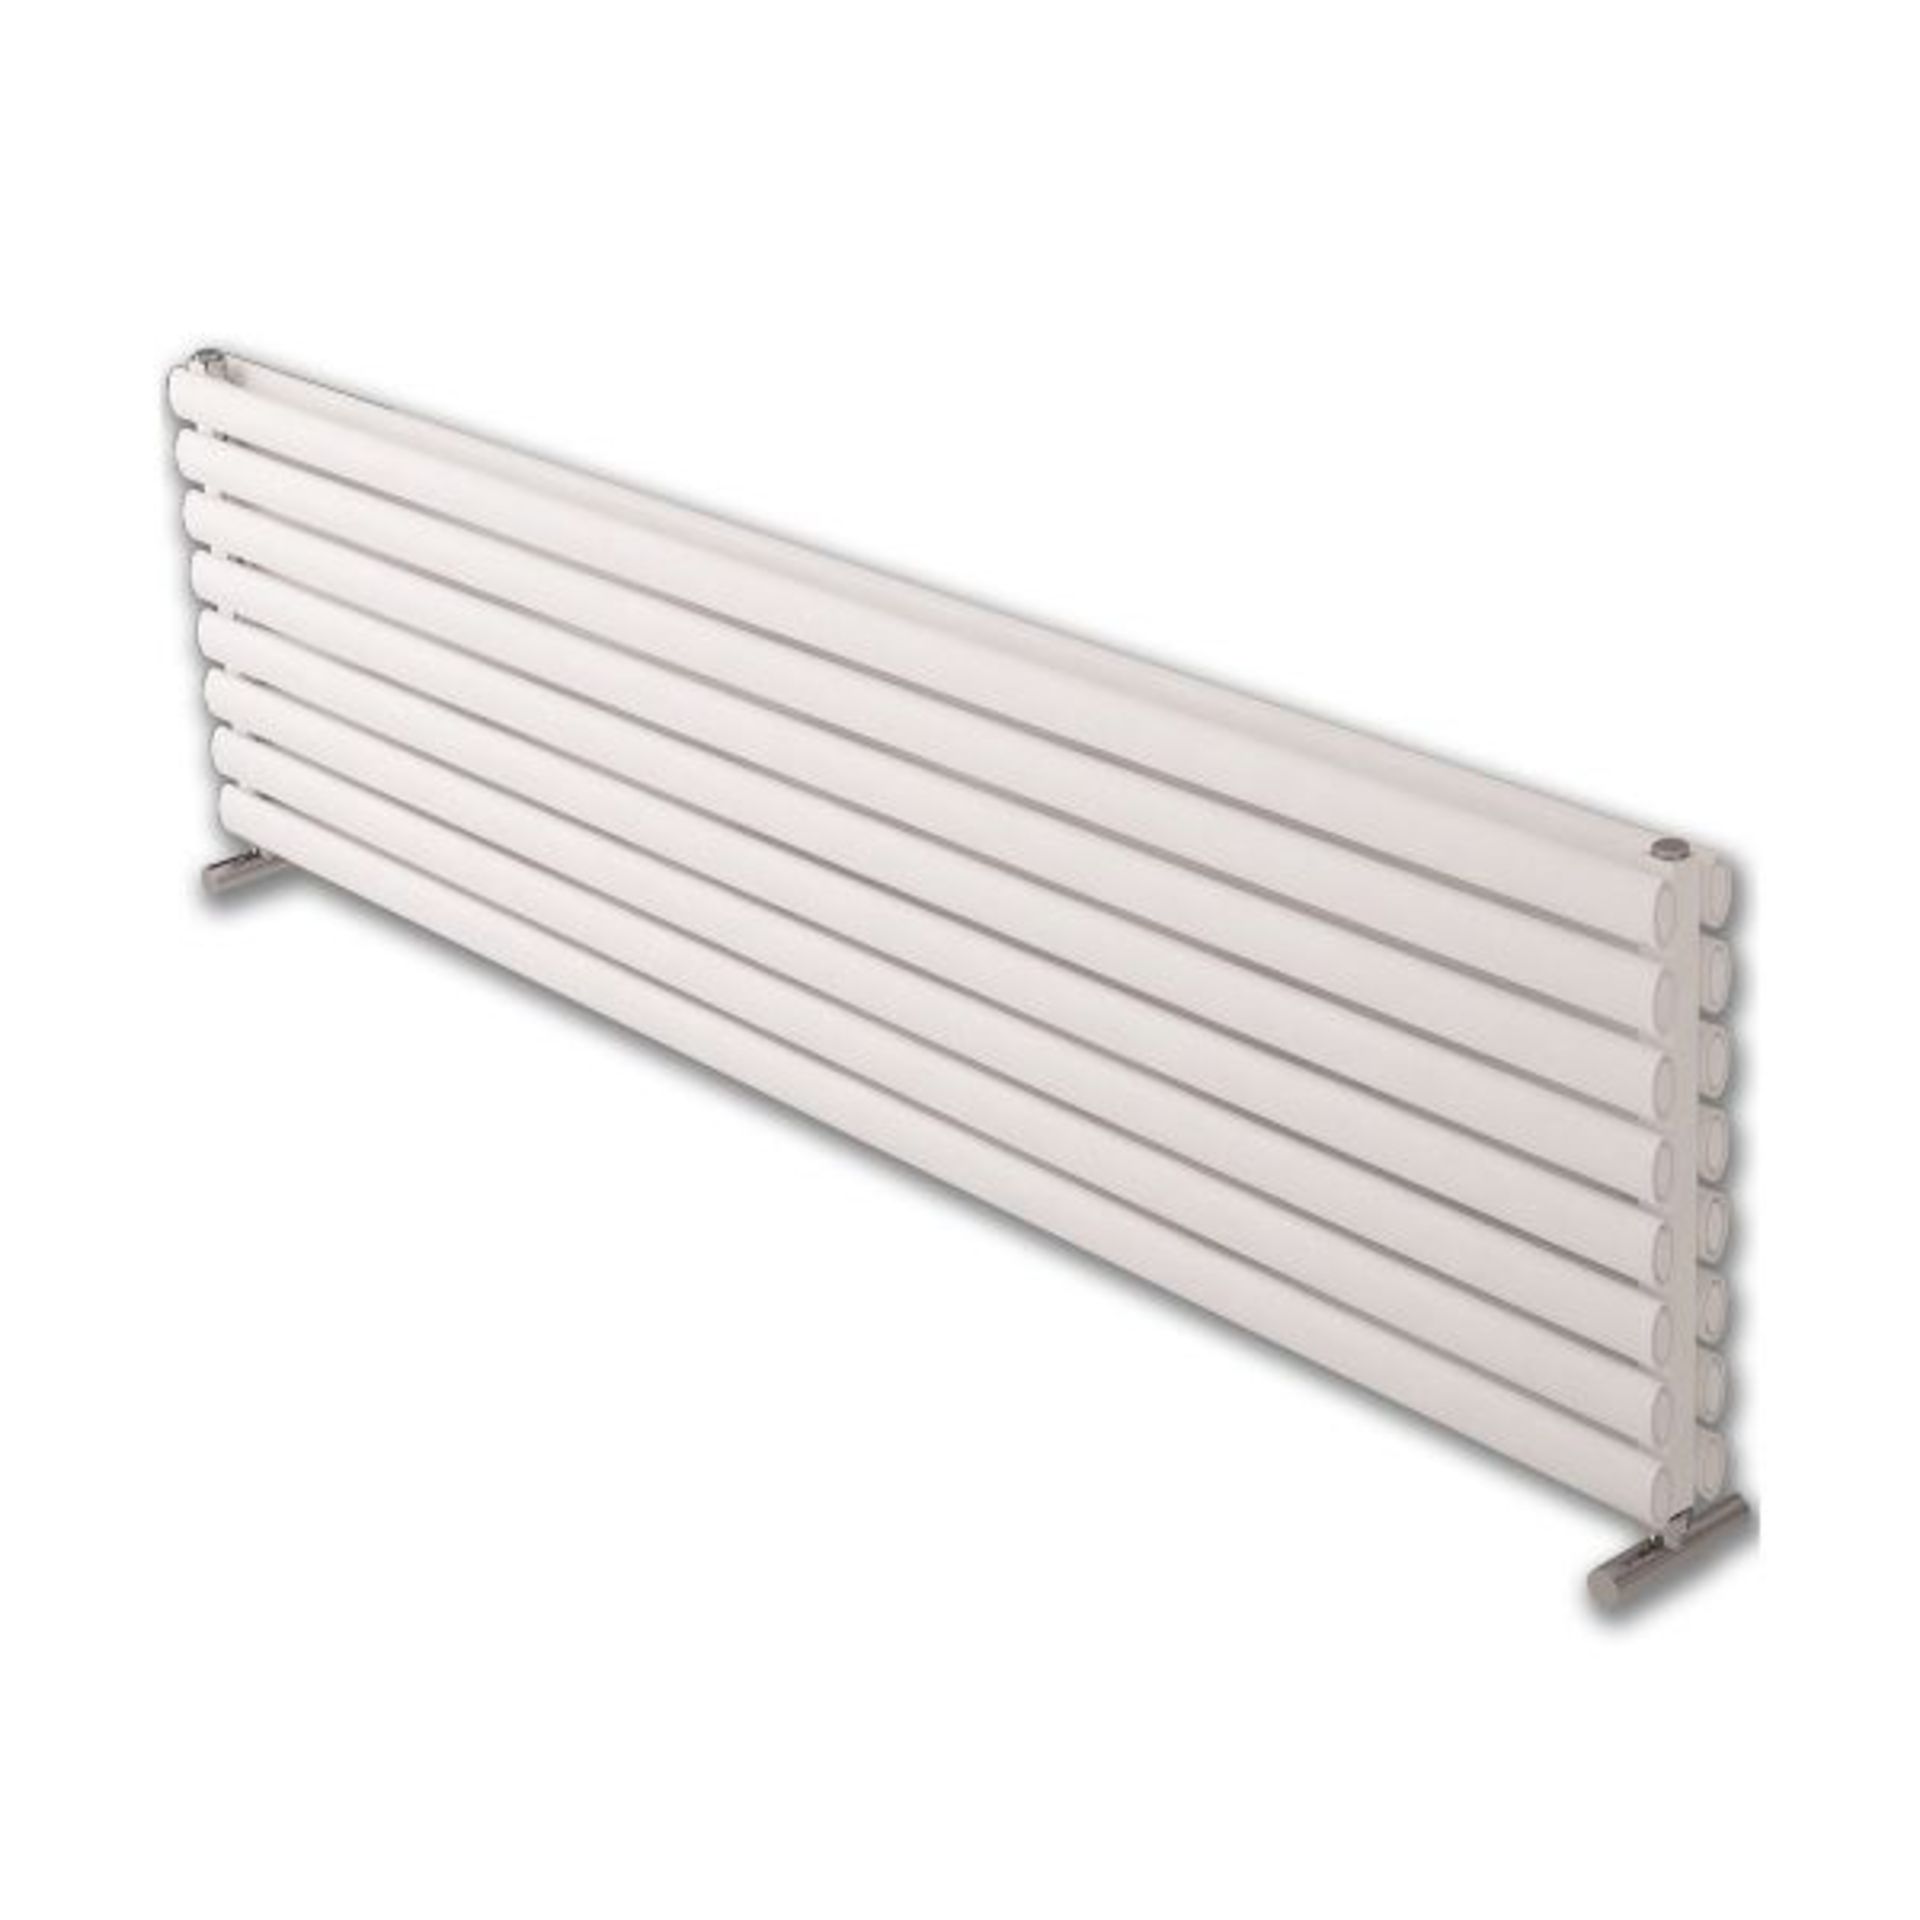 Carisa Tallis Double XL radiator, 1800x470mm, has the wall brackets, appears to still be factory